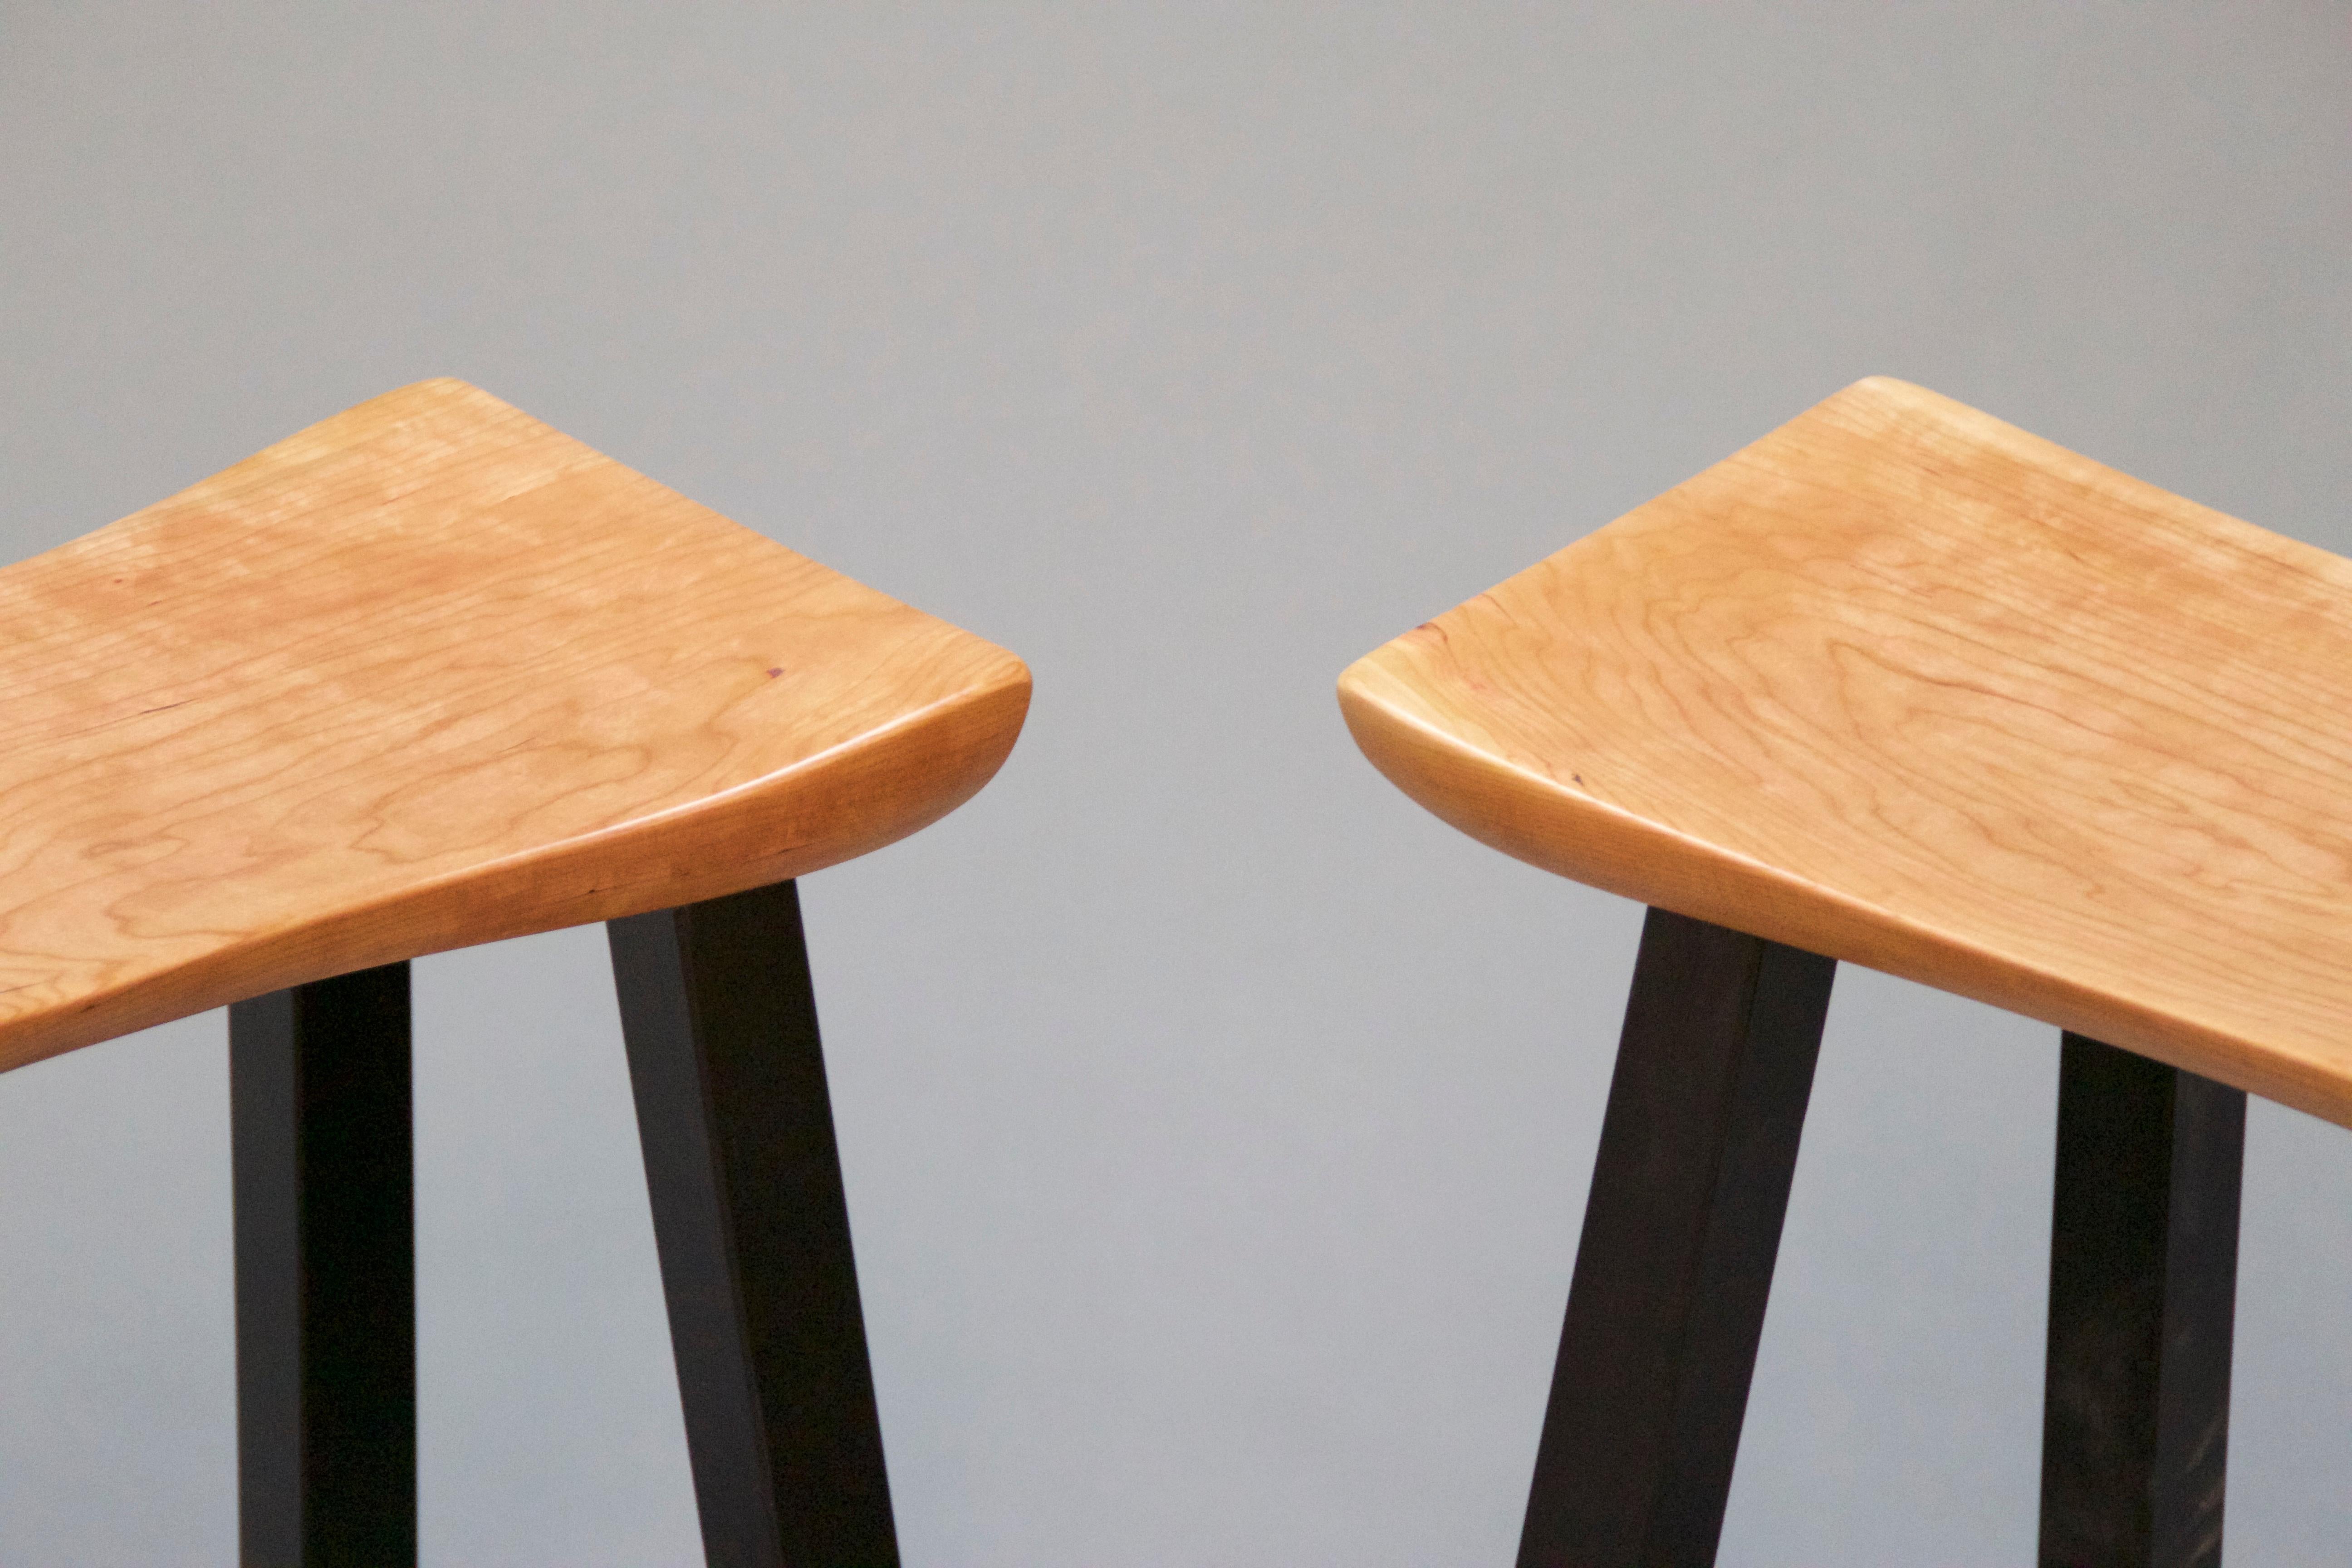 Hand Carved Solid Cherry Bar Stools with Blackened Base by Dave Lasker (amerikanisch) im Angebot